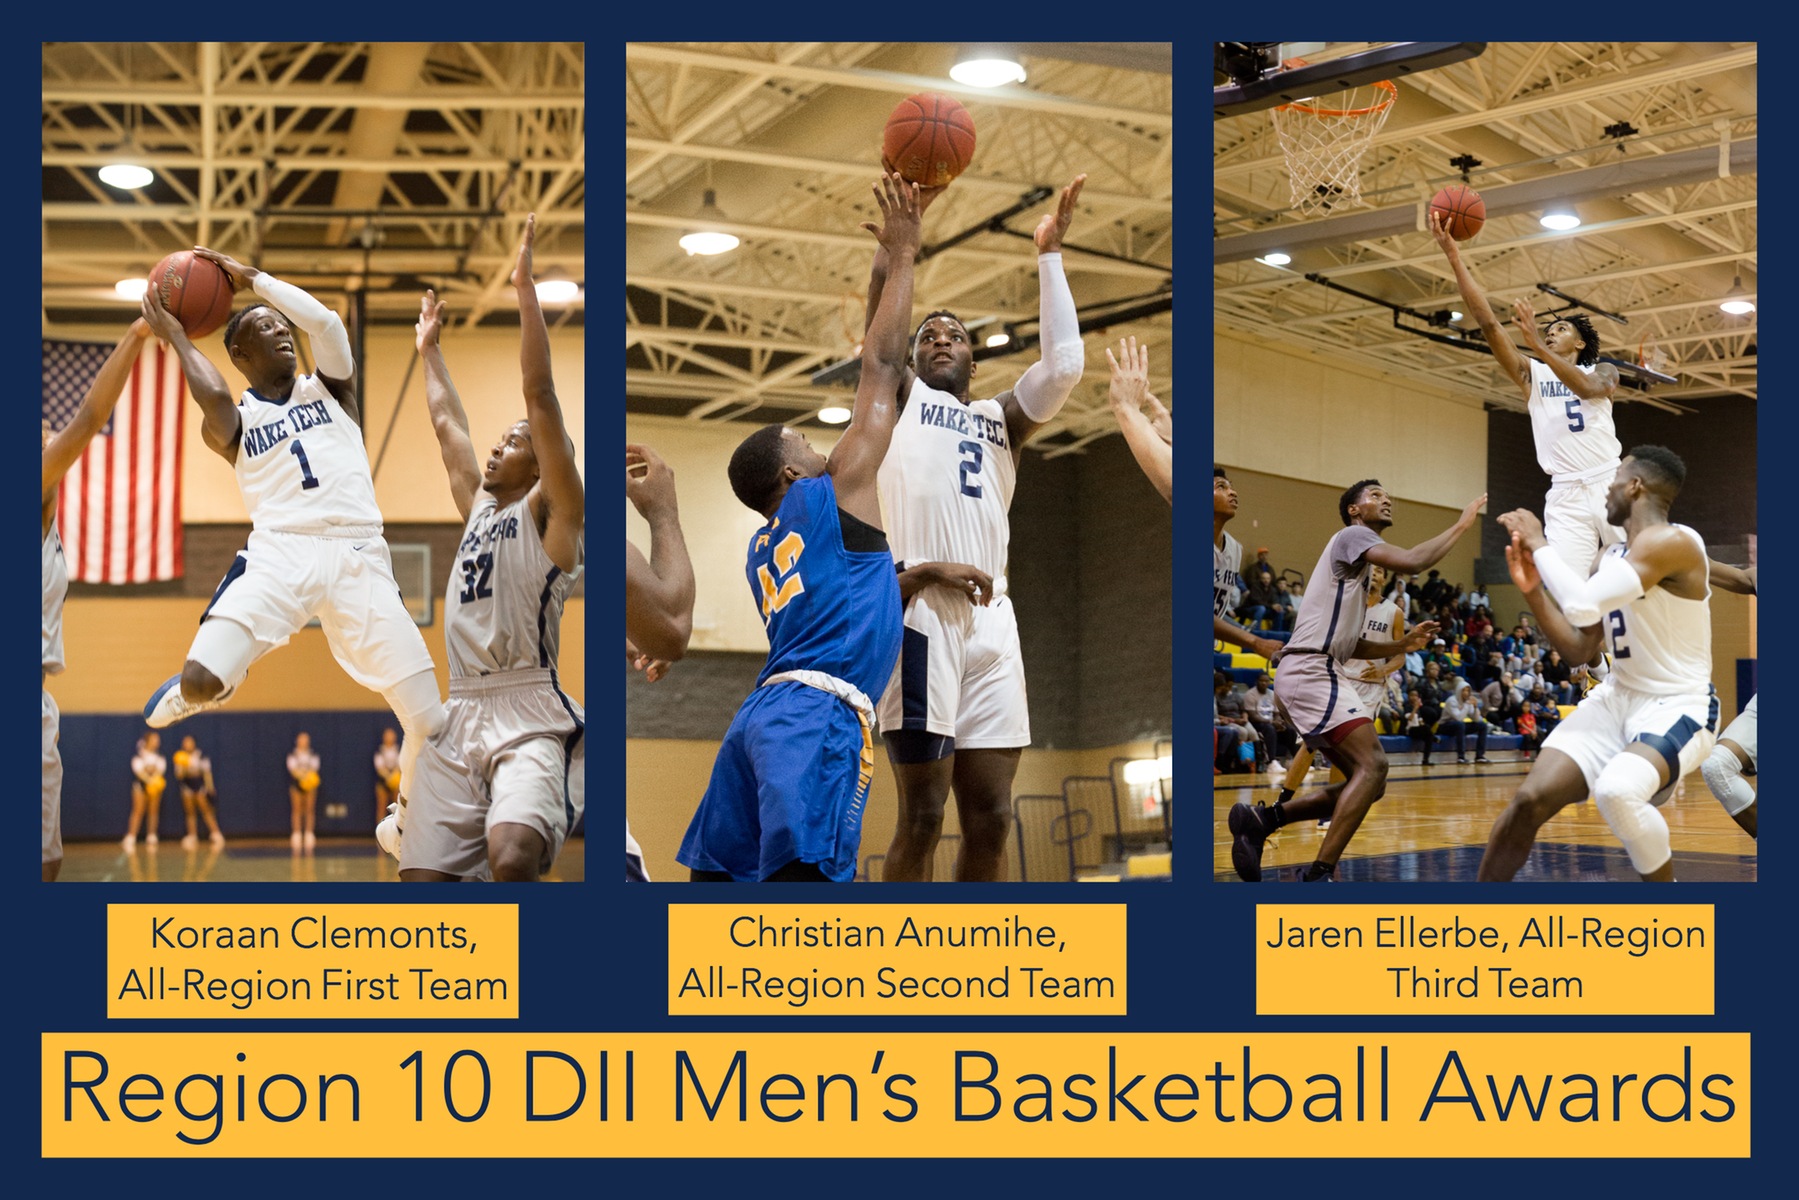 Wake Tech Athletics would like to congratulate three members of the men's basketball team for their outstanding play during the 2018-2019 Region X season.